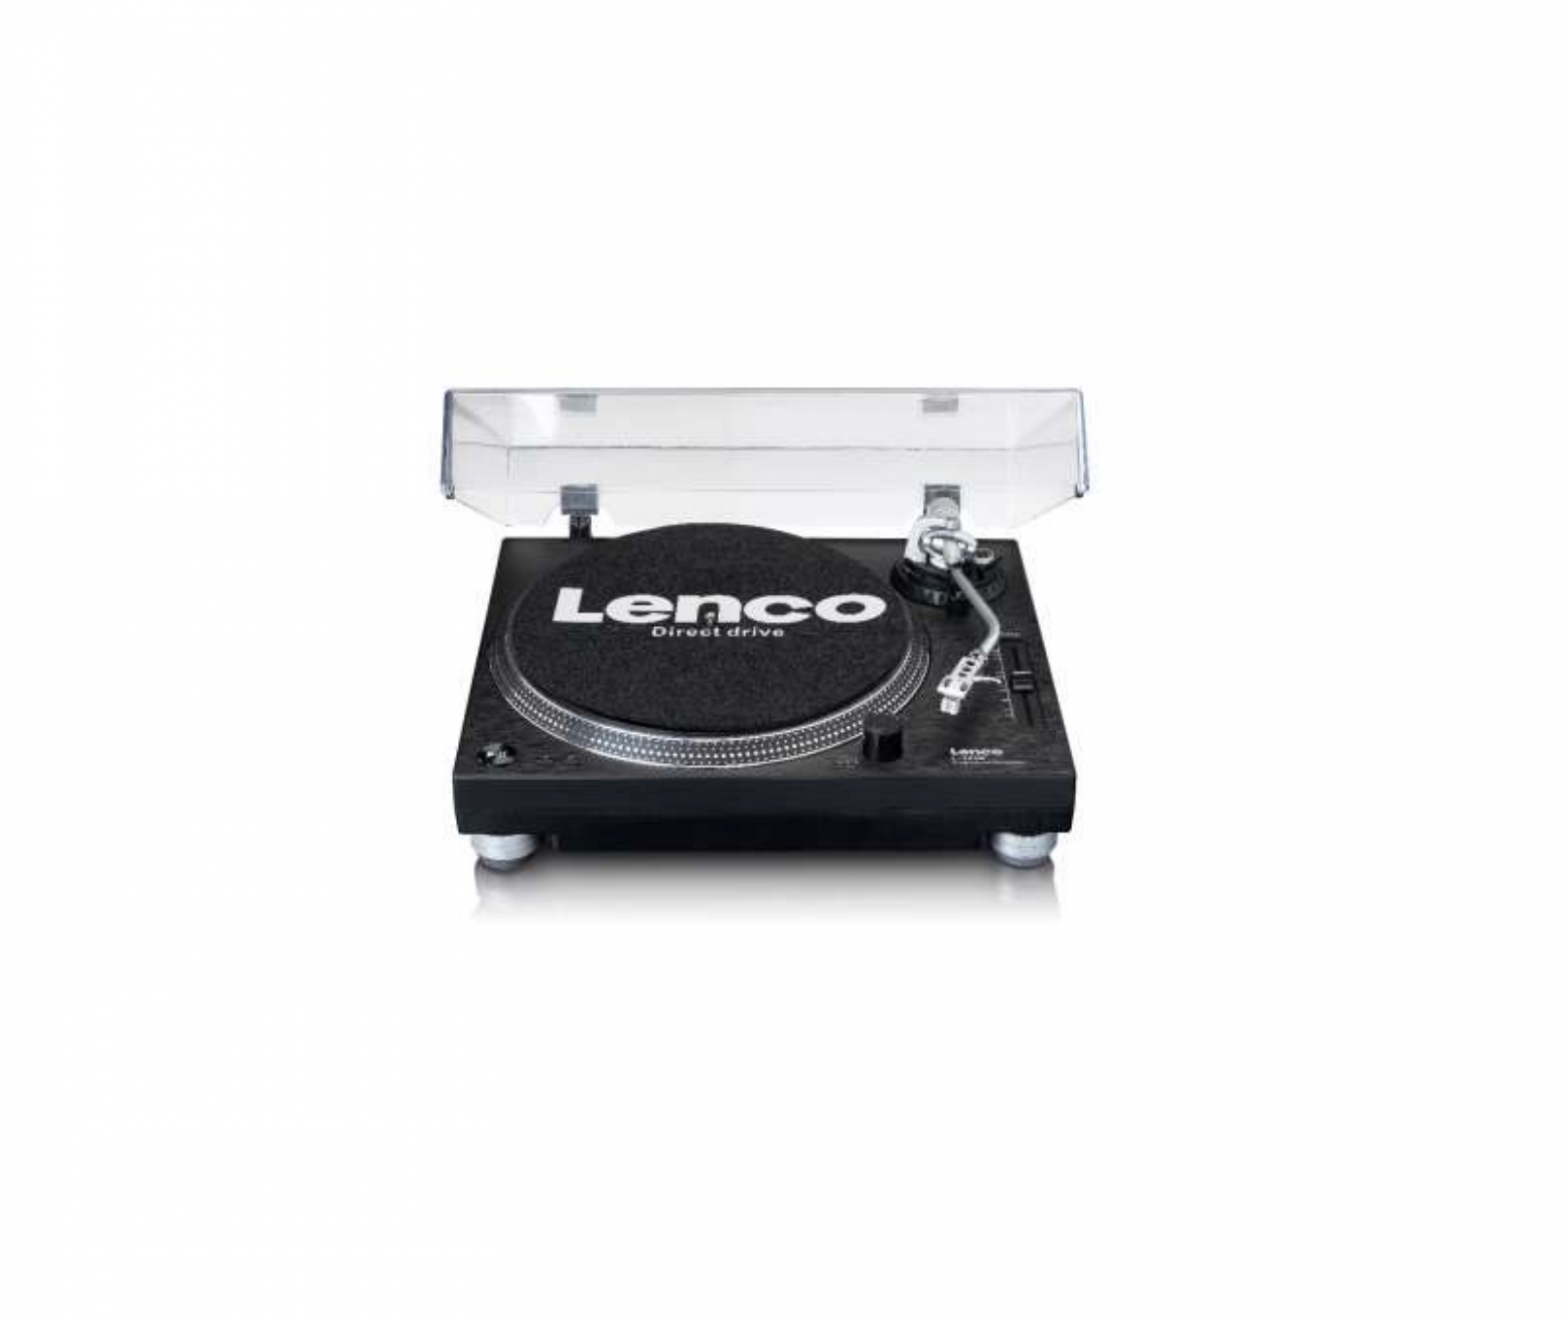 Lenco L3809 Direct Drive Turntable with USB/PC Encoding User Manual